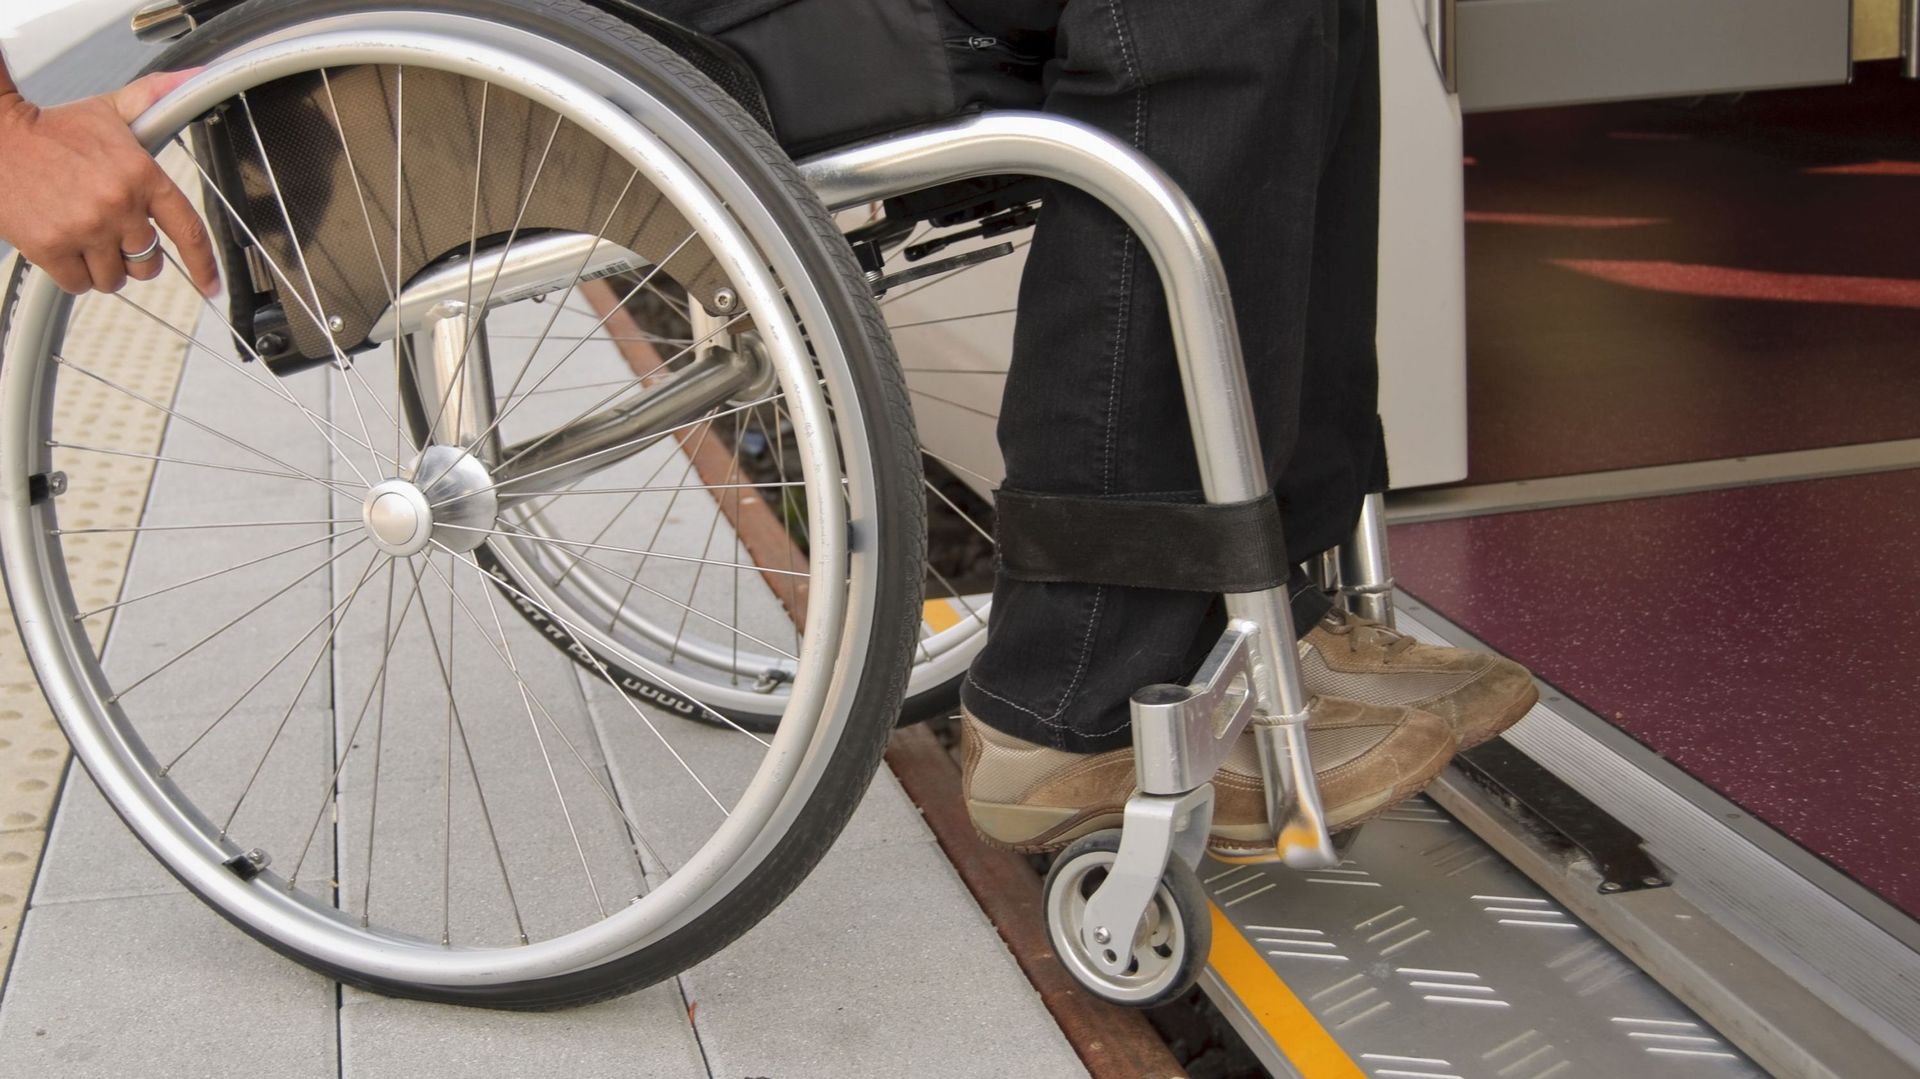 Travel independently with a wheelchair